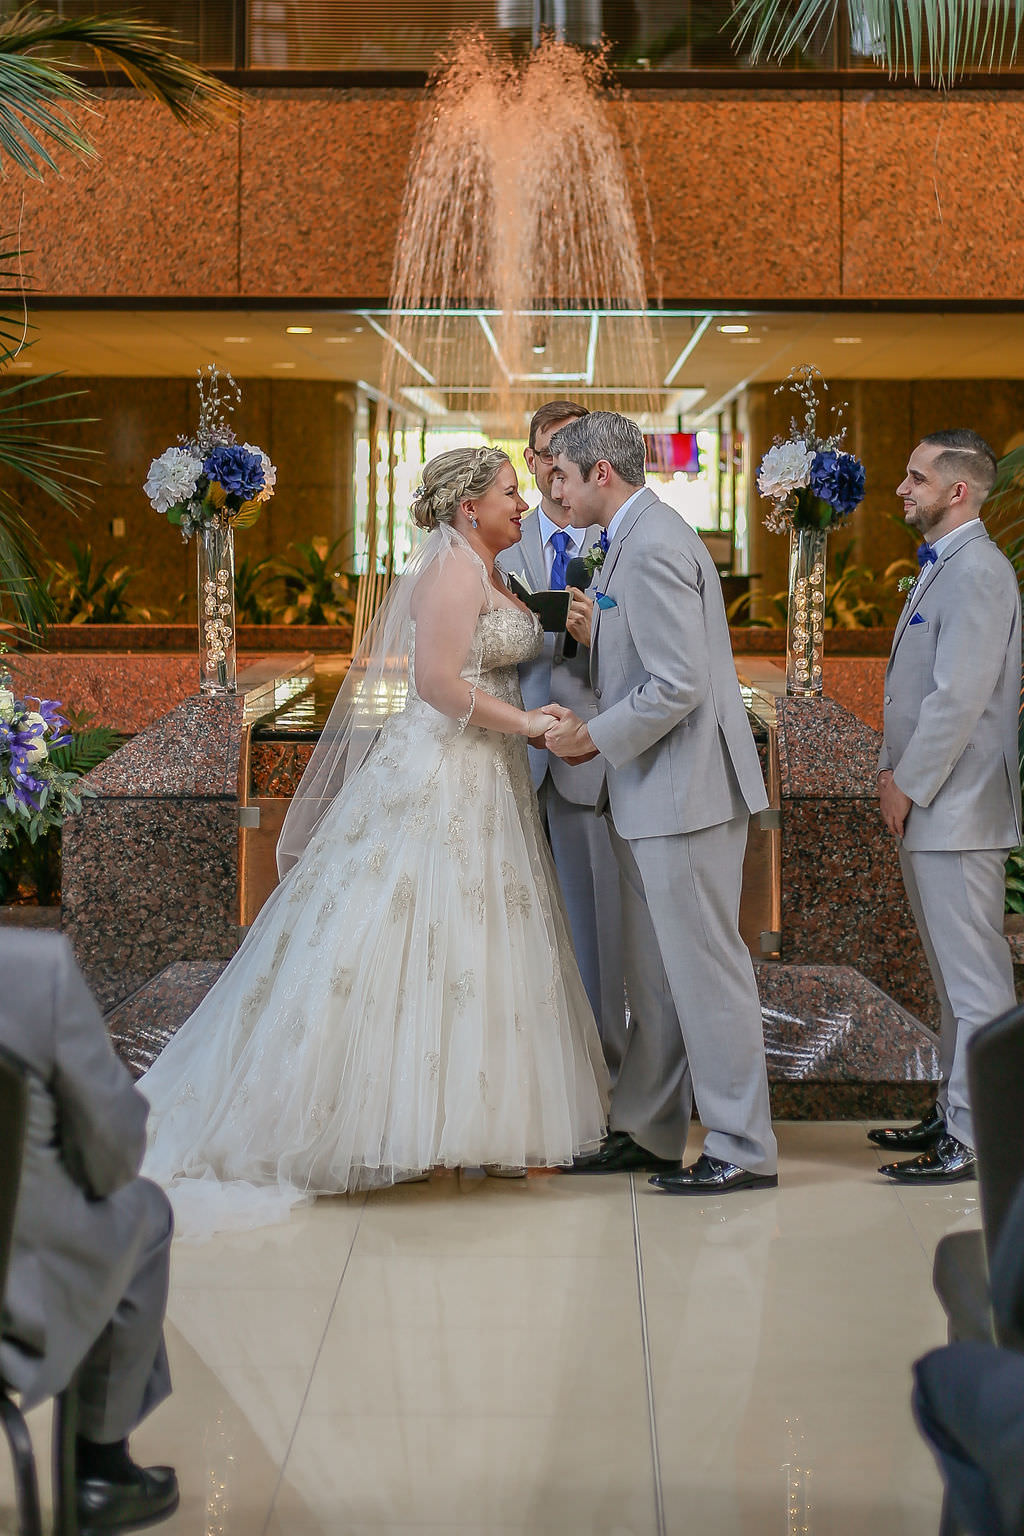 Elegant Indoor Florida Wedding Ceremony, Florida Bride and Groom at Altar, Bride Wearing Strapless A-Line Ivory Wedding Dress with Rhinestone Embellishments and Tulle Bottom , Groom in Light Gray Tuxedo, Waterfall Fountain in Ceremony Backdrop, White and Purple Wedding Ceremony Flowers | Tampa Bay Wedding Venue Tampa Centre Club